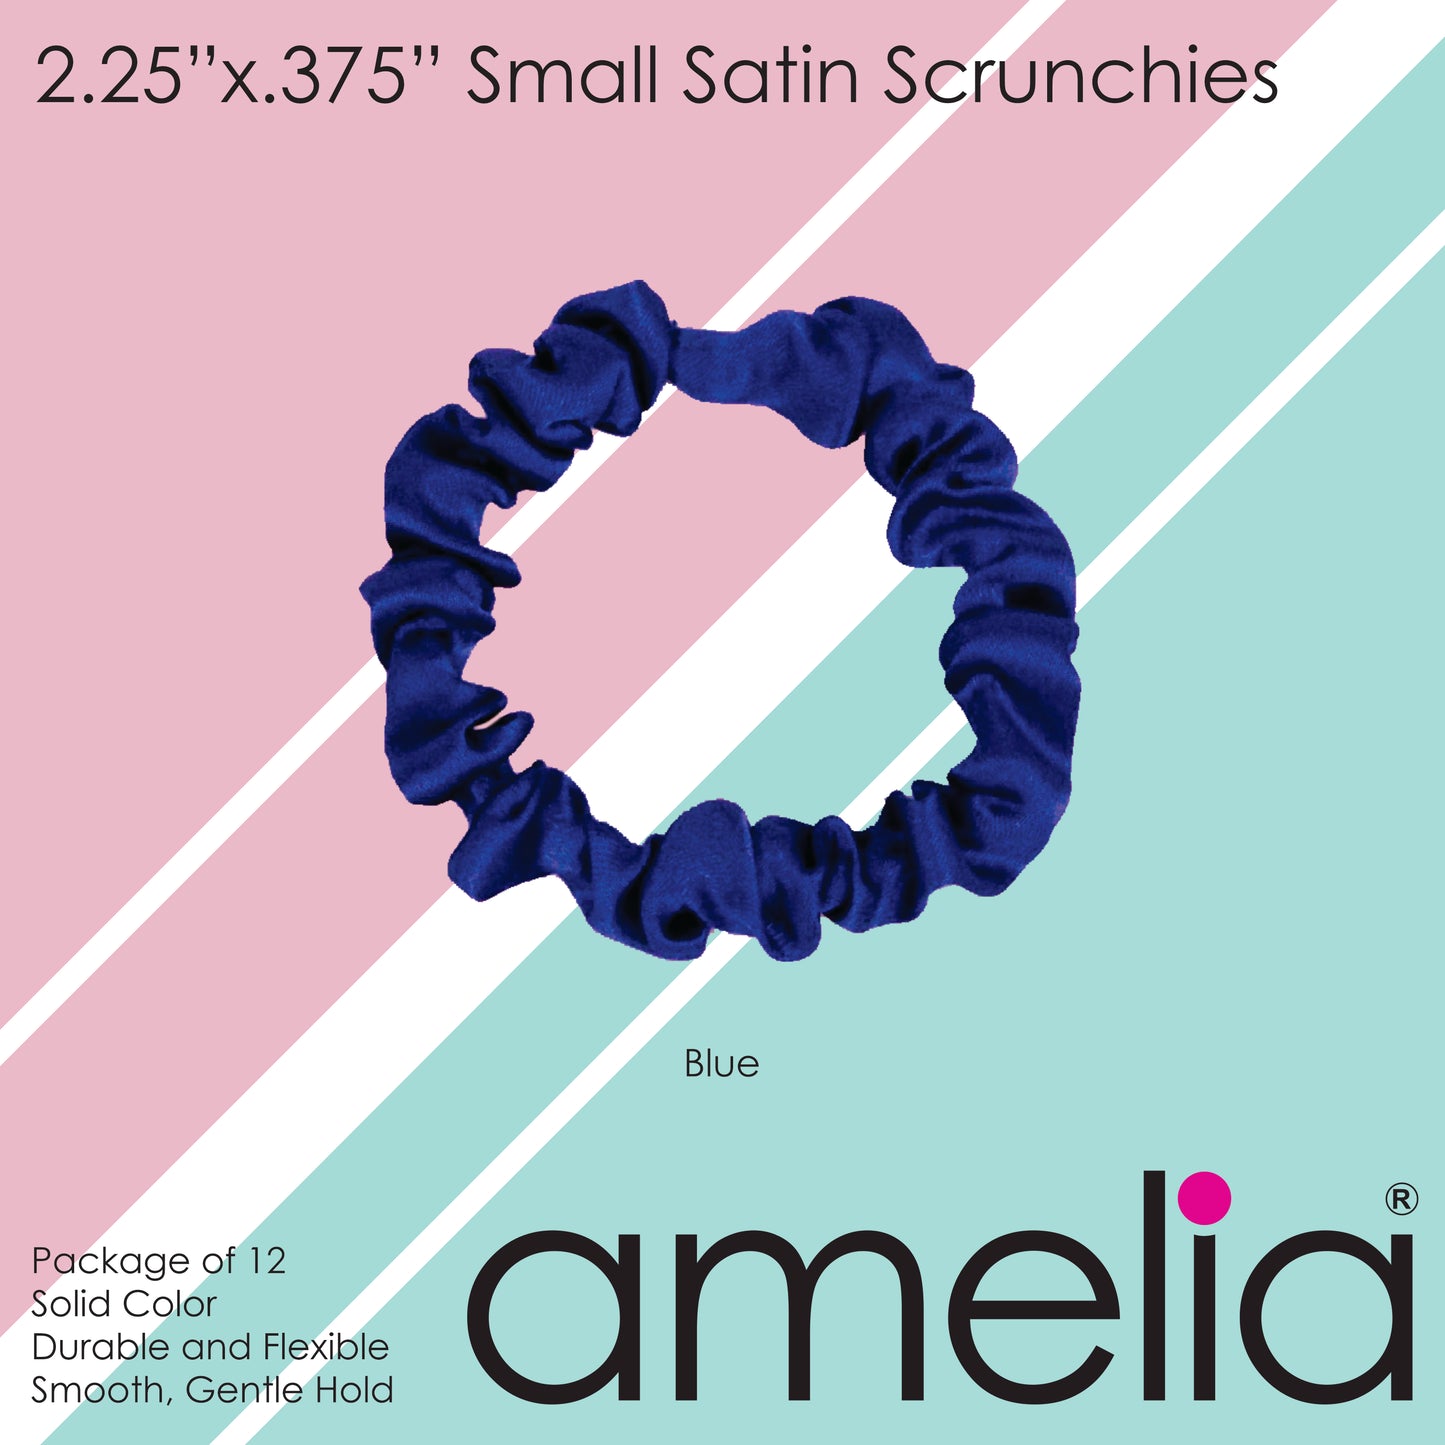 Amelia Beauty, Blue Satin Scrunchies, 2.25in Diameter, Gentle on Hair, Strong Hold, No Snag, No Dents or Creases. 12 Pack